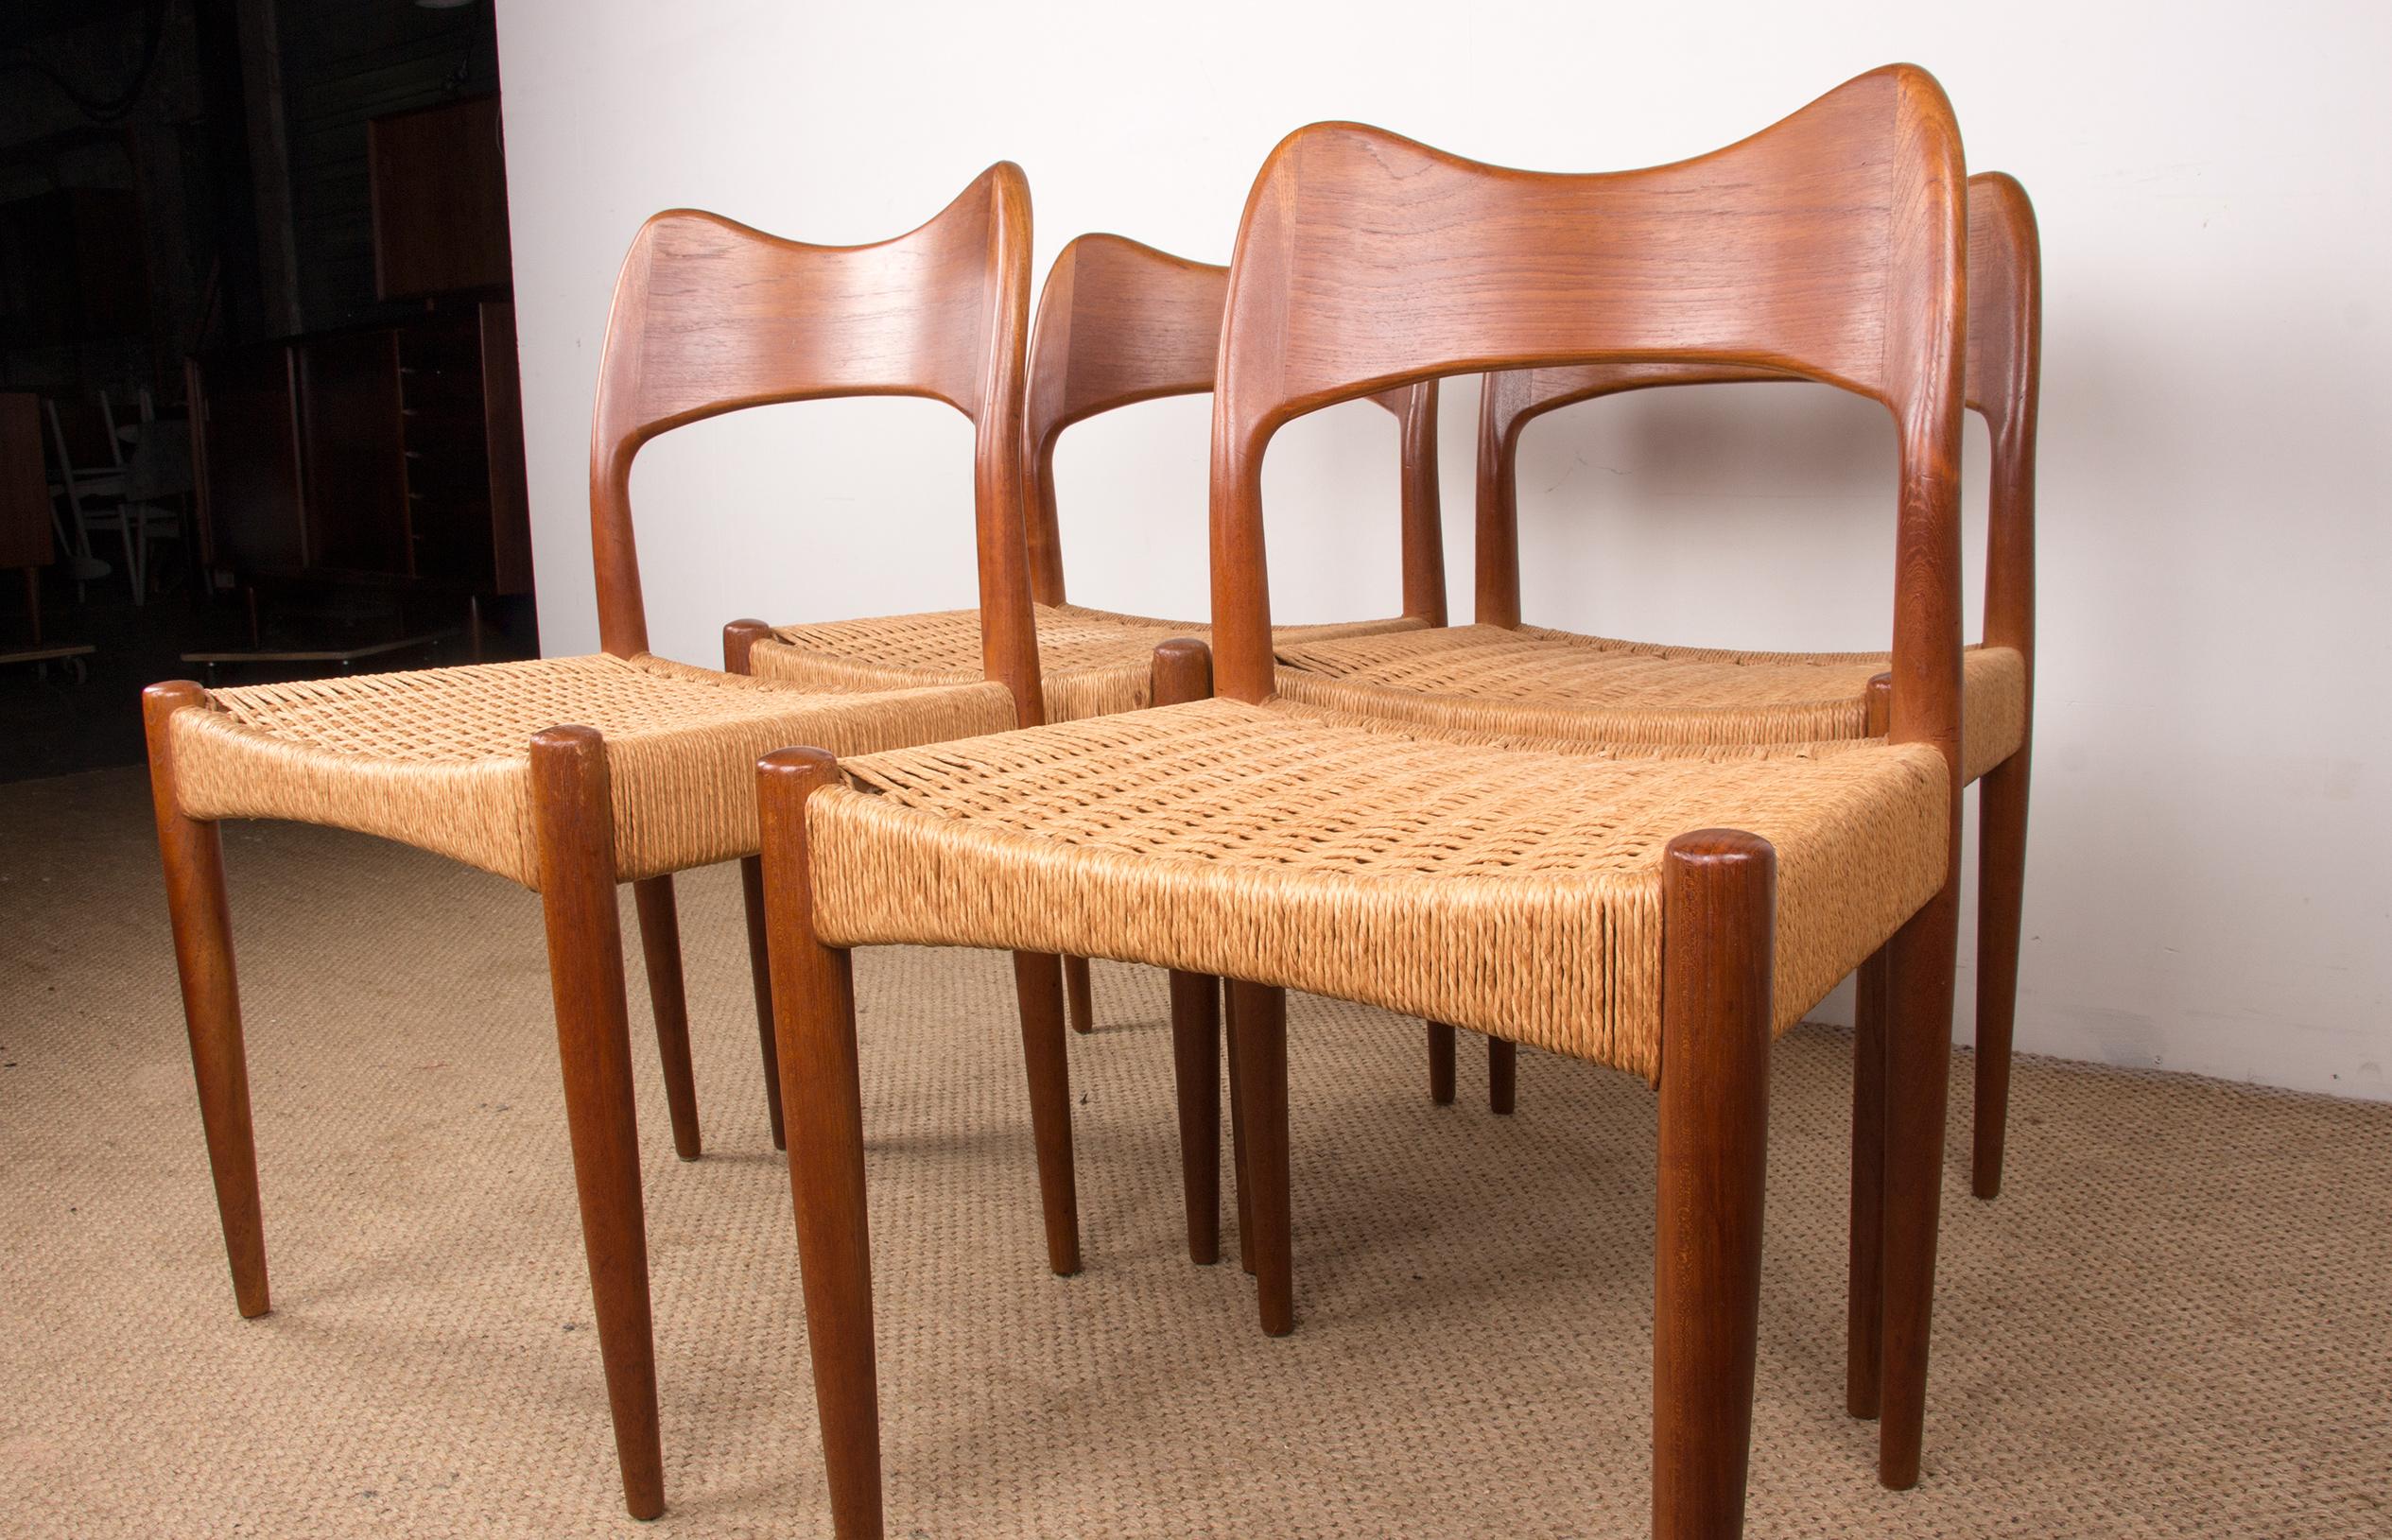 Series of 4 Danish Teak and Cordage chairs by Arne Hovmand Olsen 1960. For Sale 9